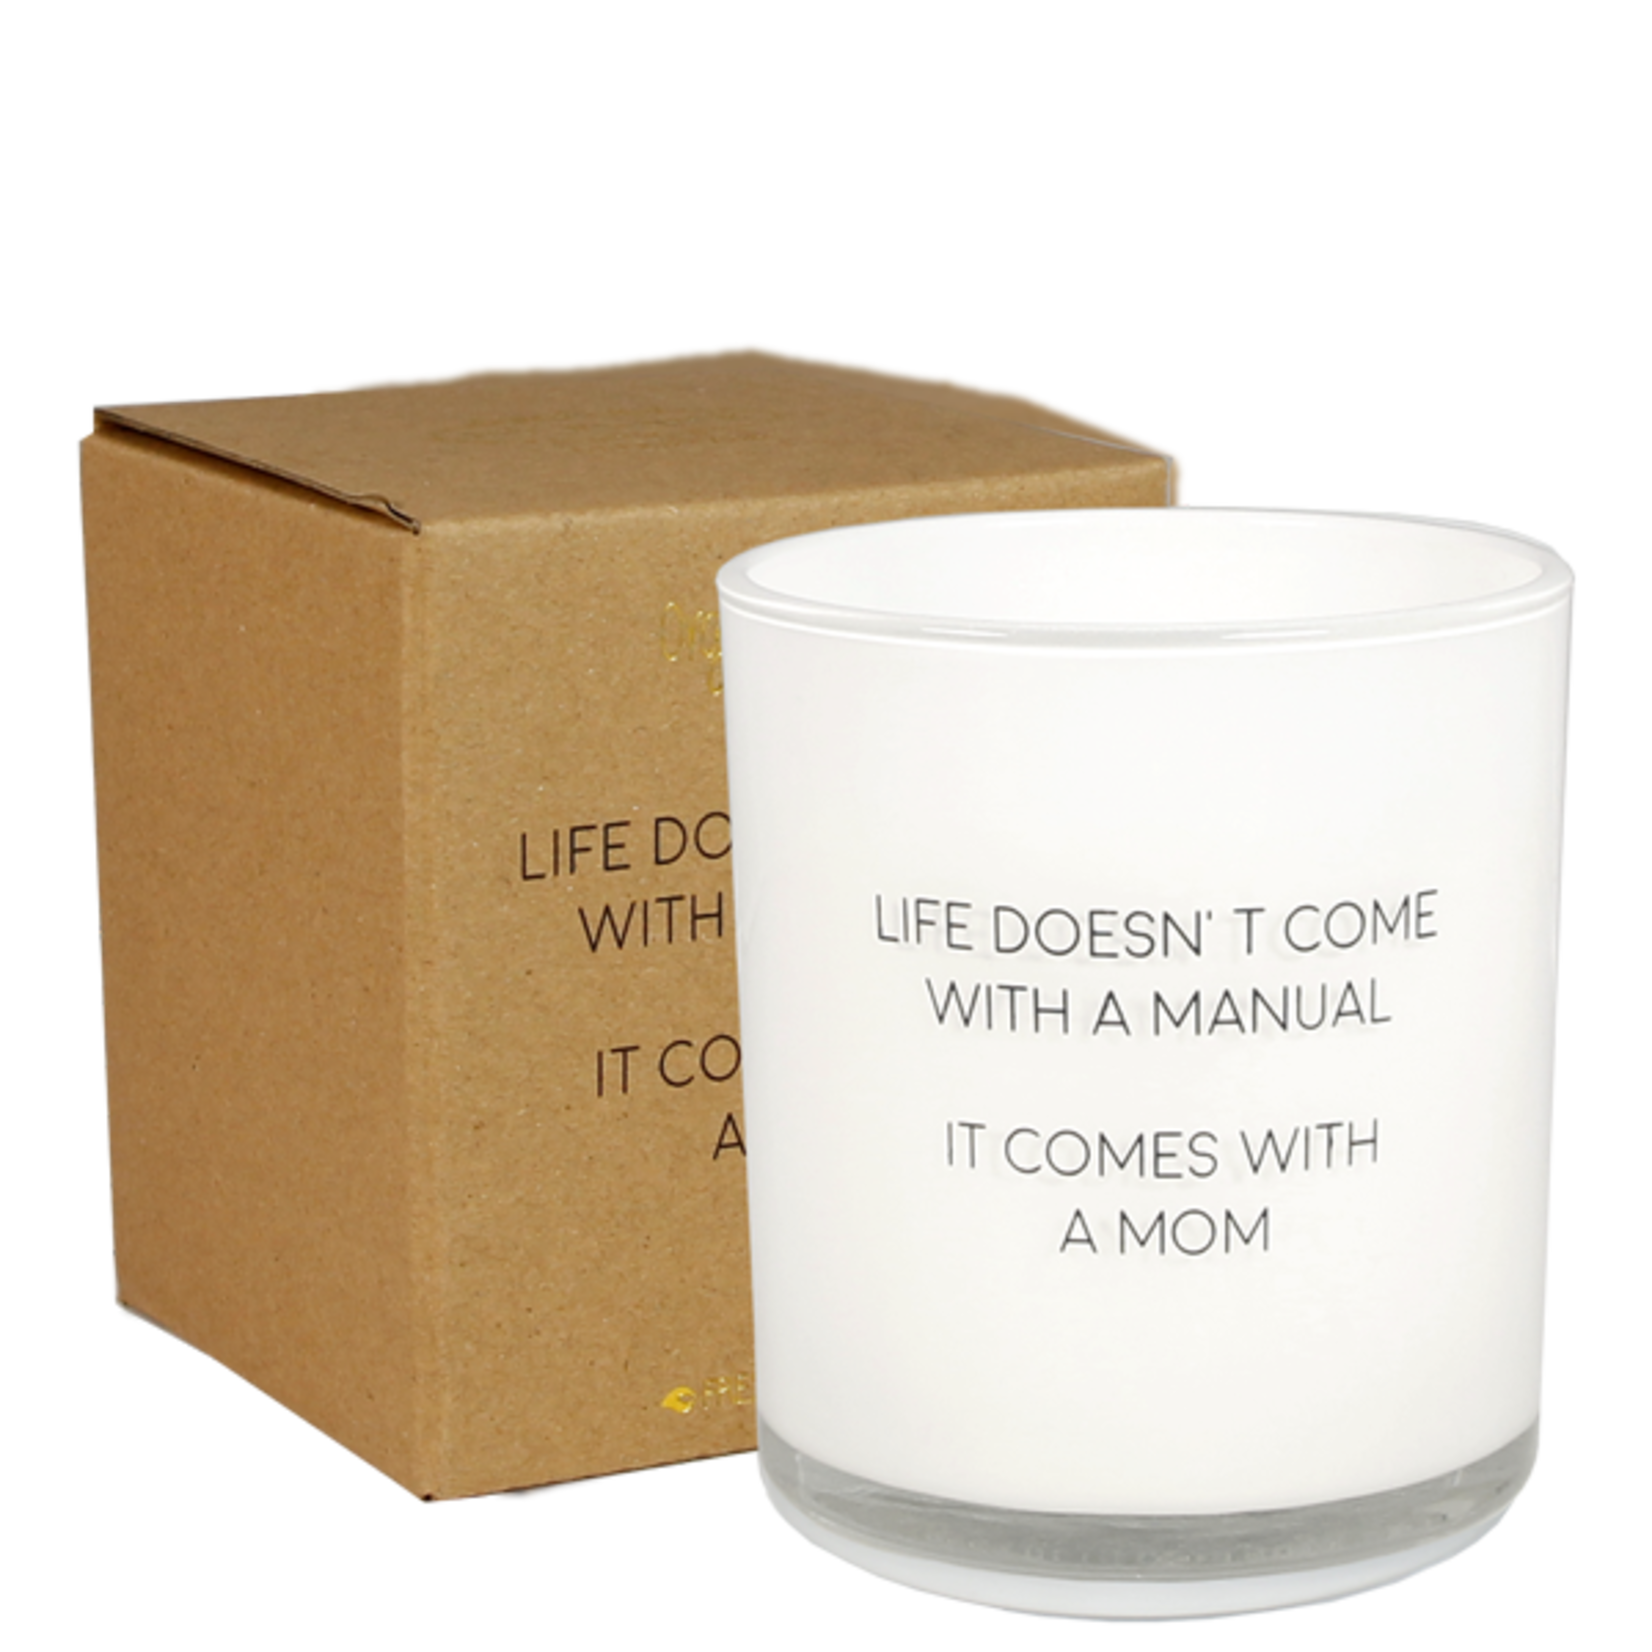 MY FLAME Sojakaars - Life doesn't come with a manual. It's a mom - Fresh Cotton